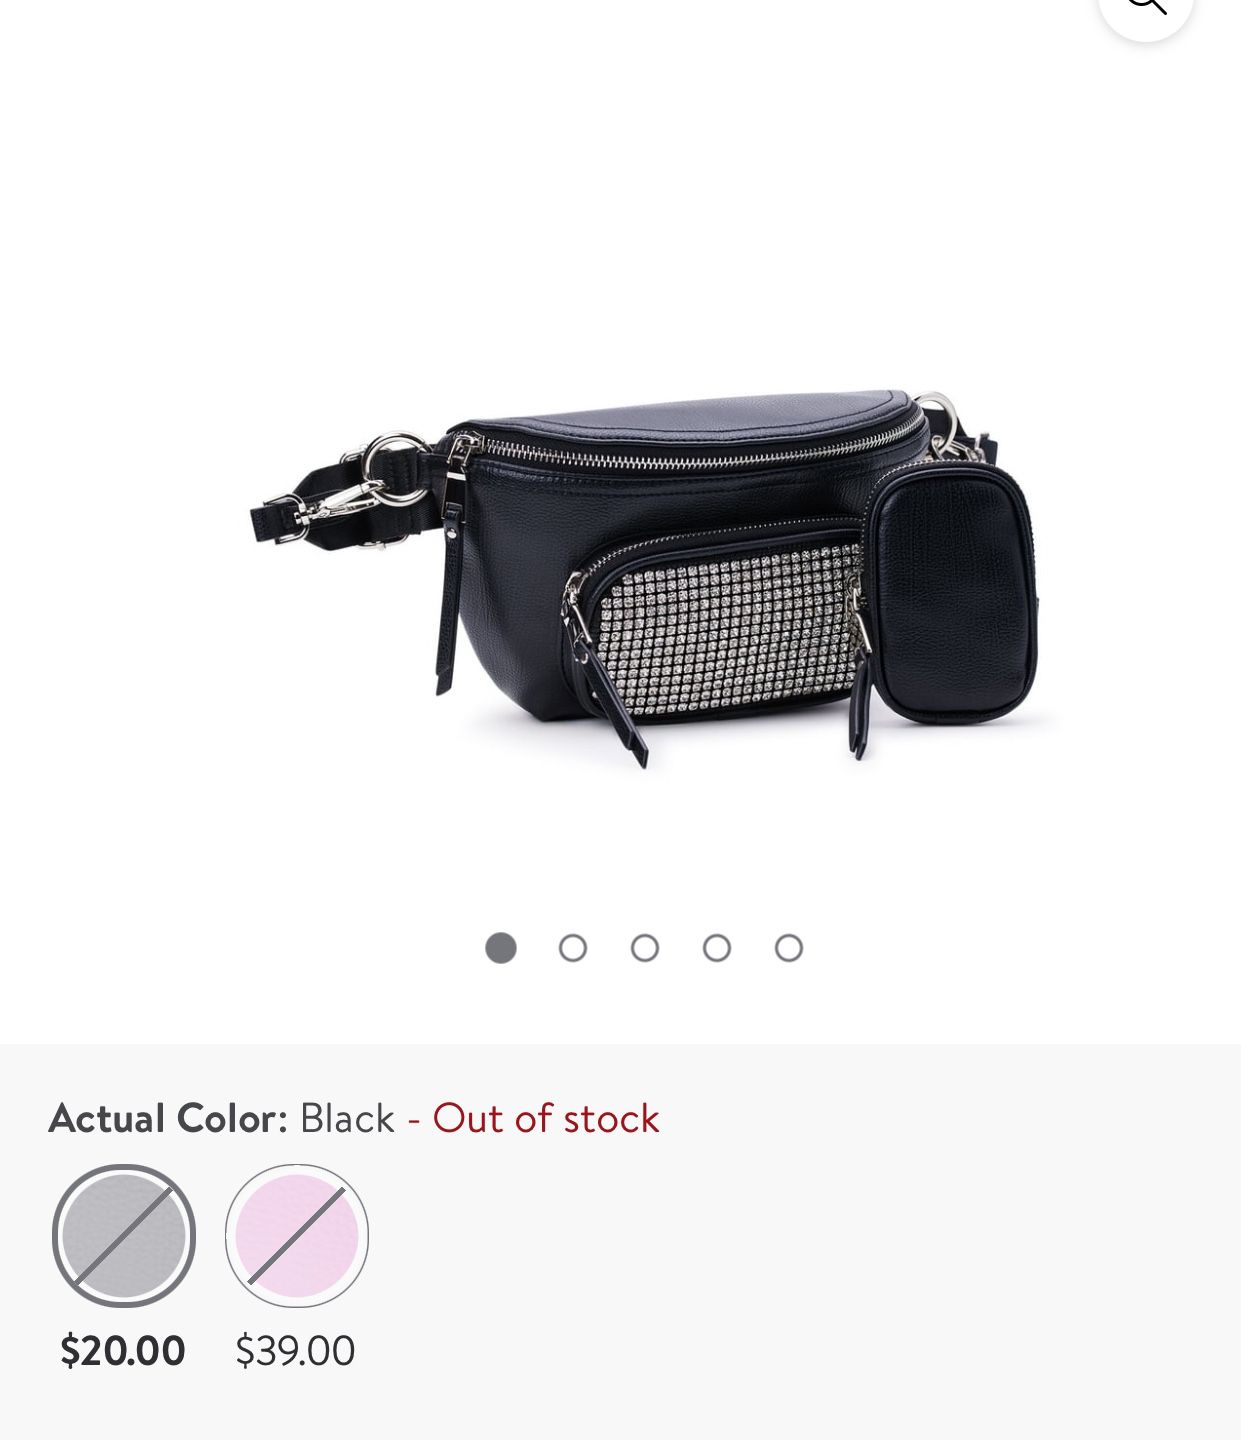 New with tags-Madden NYC Women's Crystal Fanny Pack Crossbody, Black